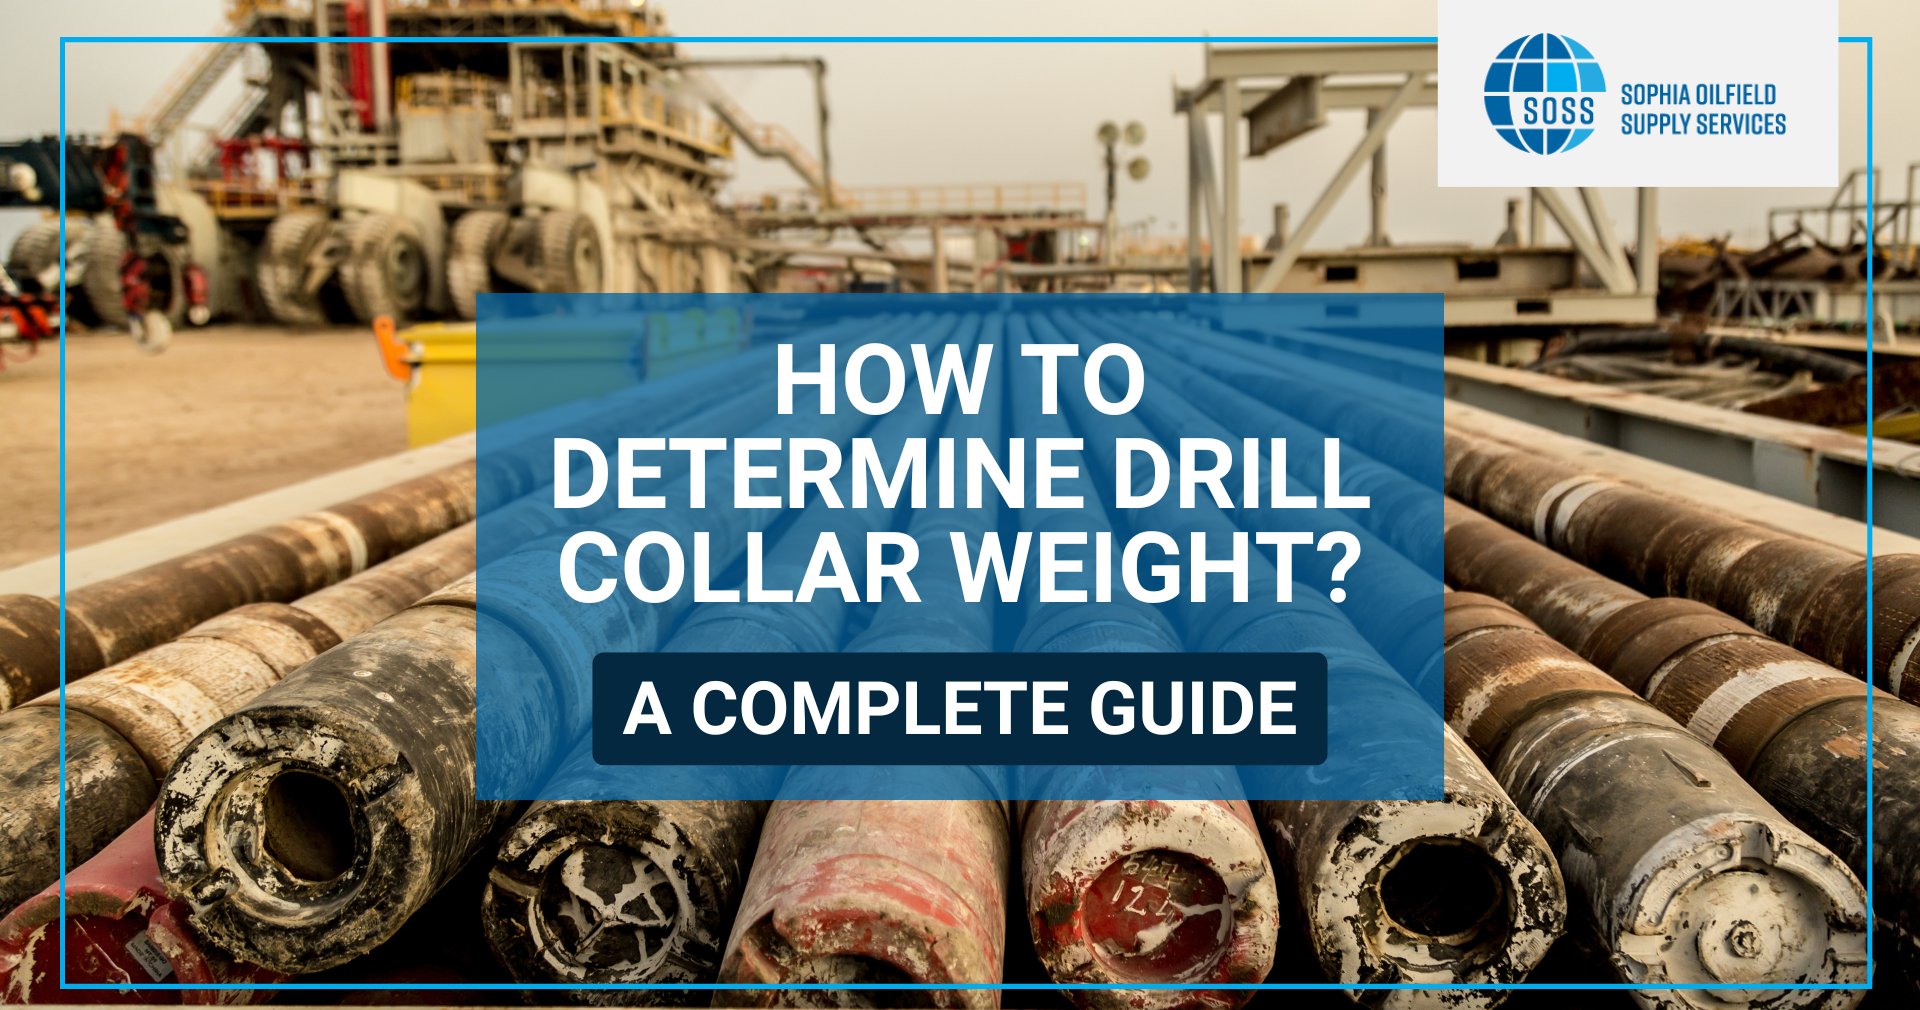 HOW TO DETERMINE DRILL COLLAR WEIGHT